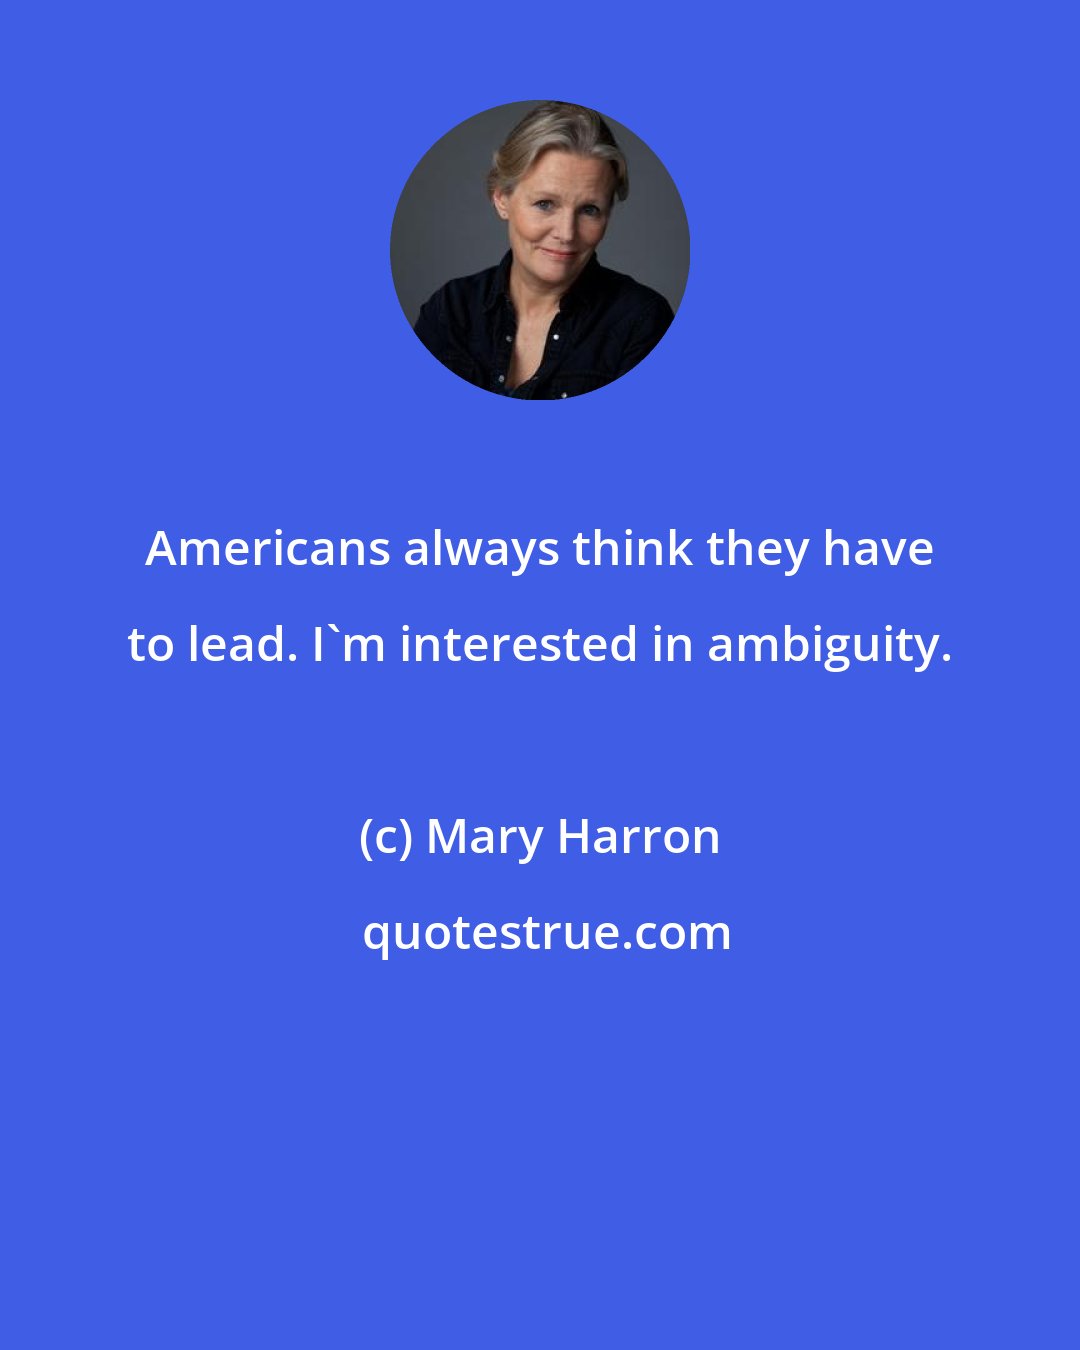 Mary Harron: Americans always think they have to lead. I'm interested in ambiguity.